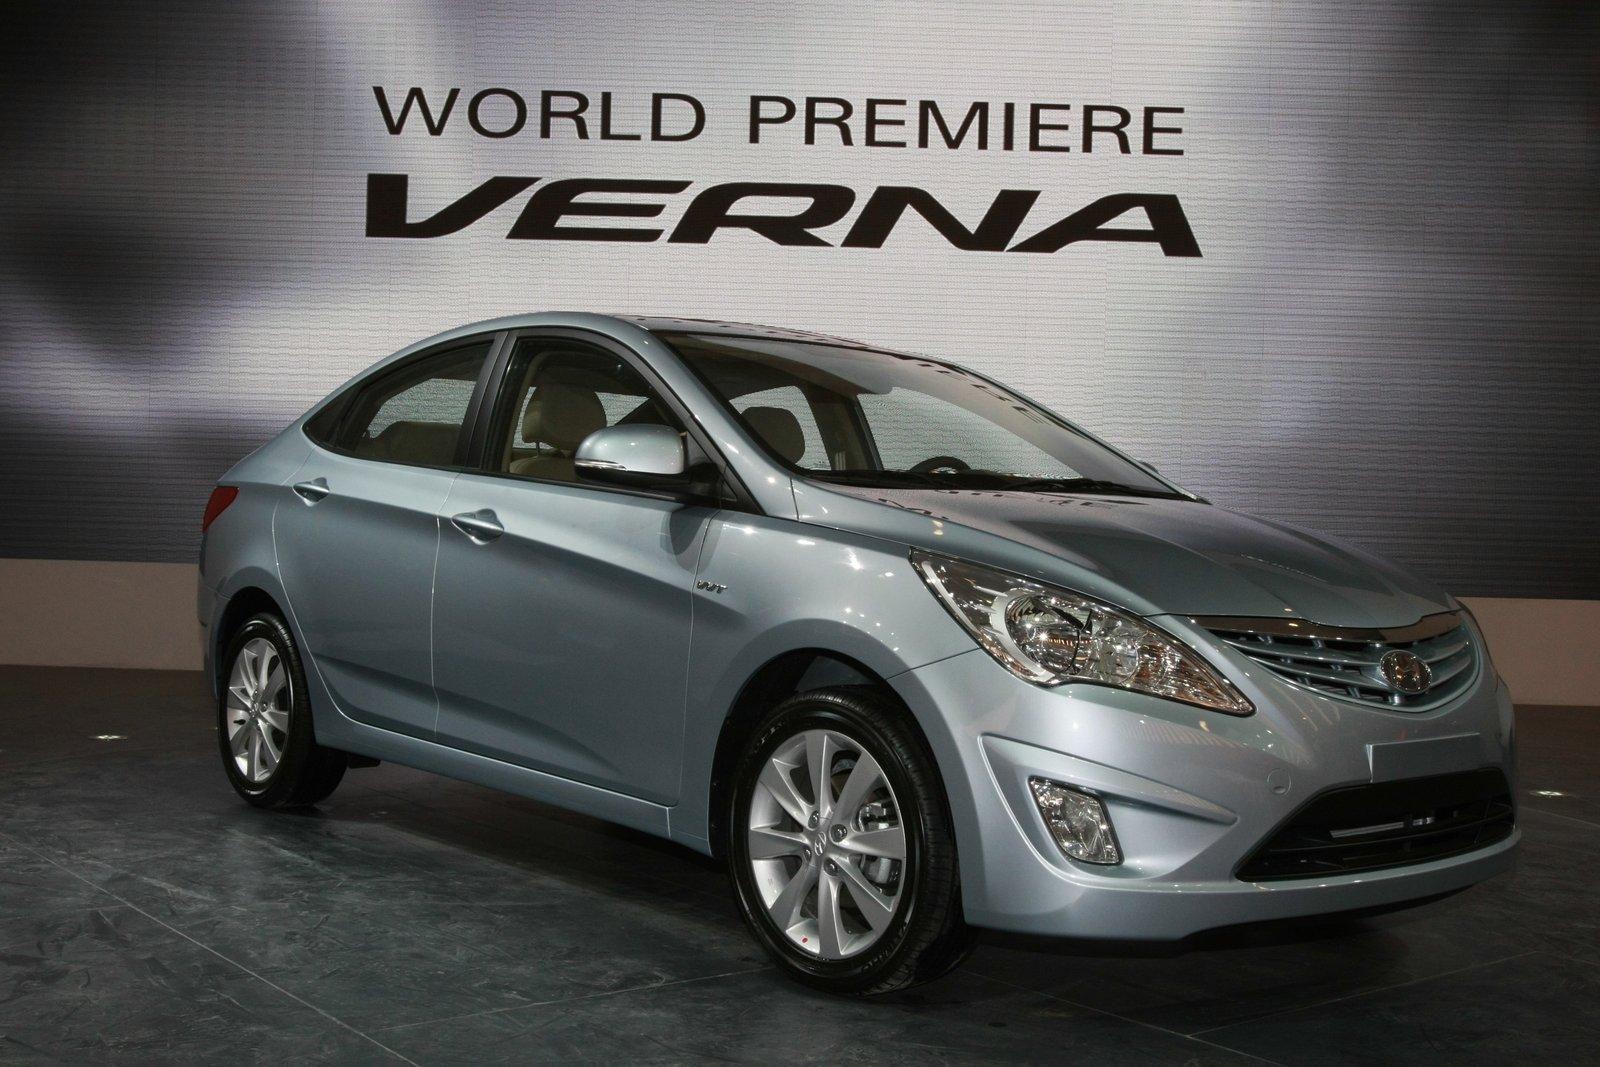 Hyundai Verna / Accent 2010 photo 58913 picture at high resolution